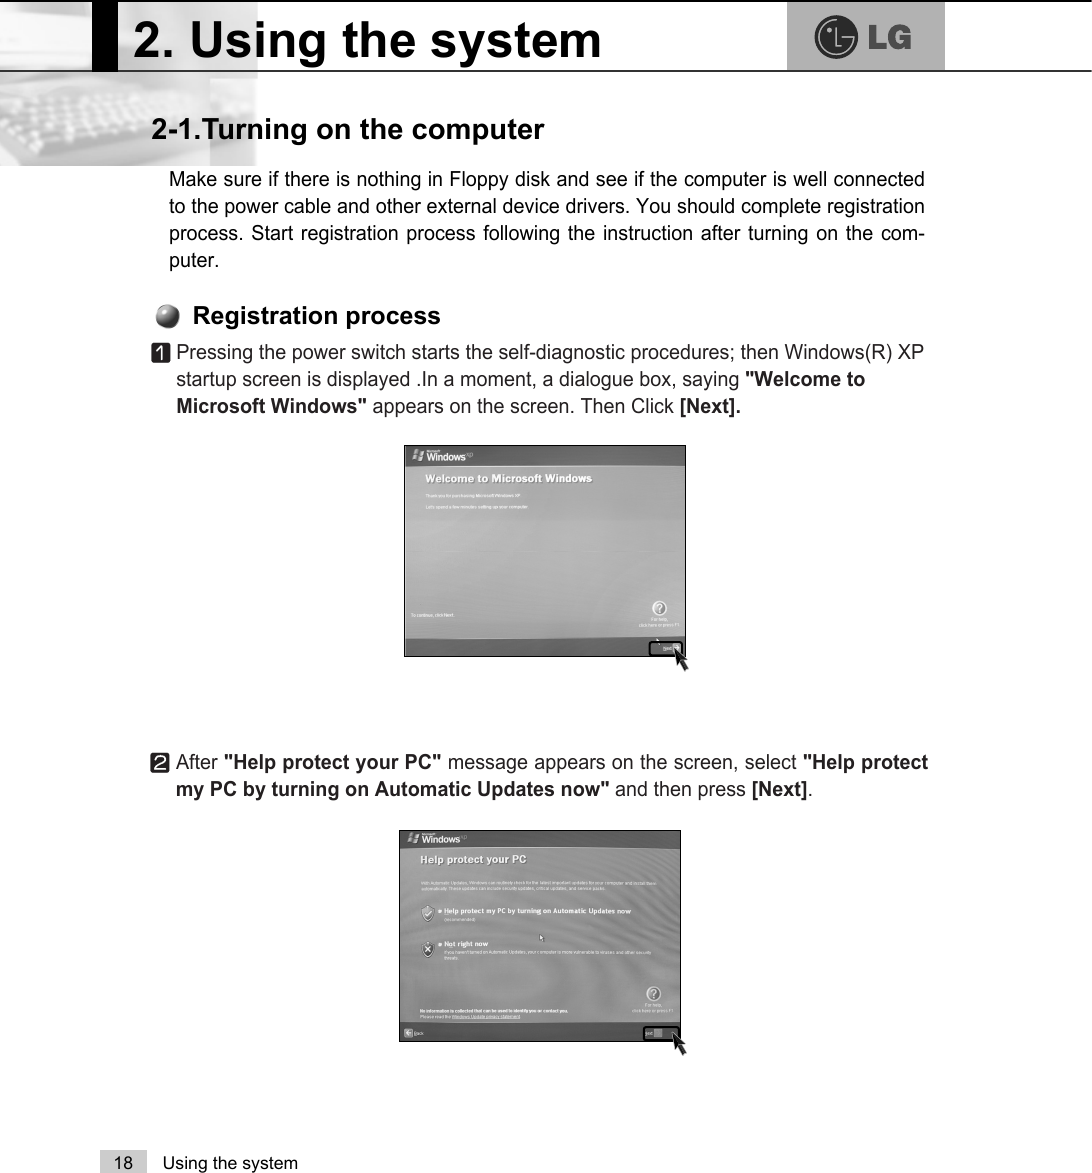 2. Using the system18 Using the systemMake sure if there is nothing in Floppy disk and see if the computer is well connectedto the power cable and other external device drivers. You should complete registrationprocess. Start registration process following the instruction after turning on the com-puter.2-1.Turning on the computerⓞPressing the power switch starts the self-diagnostic procedures; then Windows(R) XPstartup screen is displayed .In a moment, a dialogue box, saying &quot;Welcome toMicrosoft Windows&quot; appears on the screen. Then Click [Next].Registration processⓟAfter &quot;Help protect your PC&quot; message appears on the screen, select &quot;Help protectmy PC by turning on Automatic Updates now&quot; and then press [Next]. 